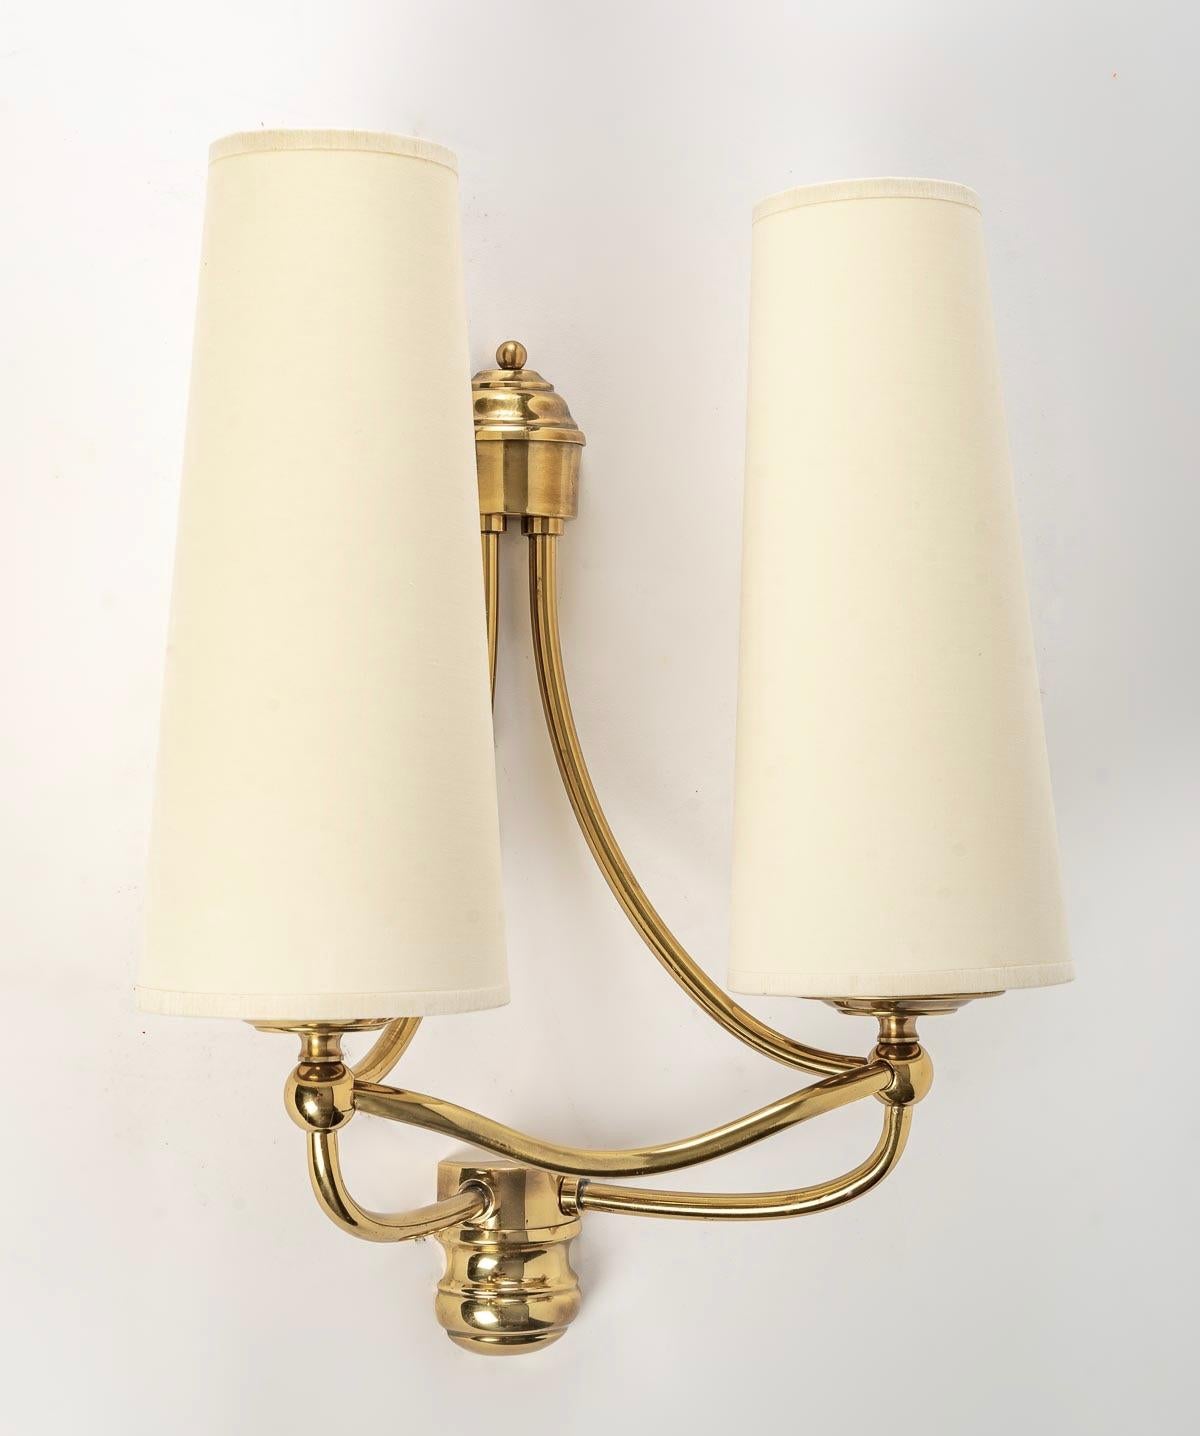 1970 pair of gilt brass sconces by Maison Roche

Each wall lamp is composed of two light arms distributed on each side of the wall lamp in gilded brass and underlined by nicely curved gilded brass rods.
Two handmade shades in off-white cotton cover